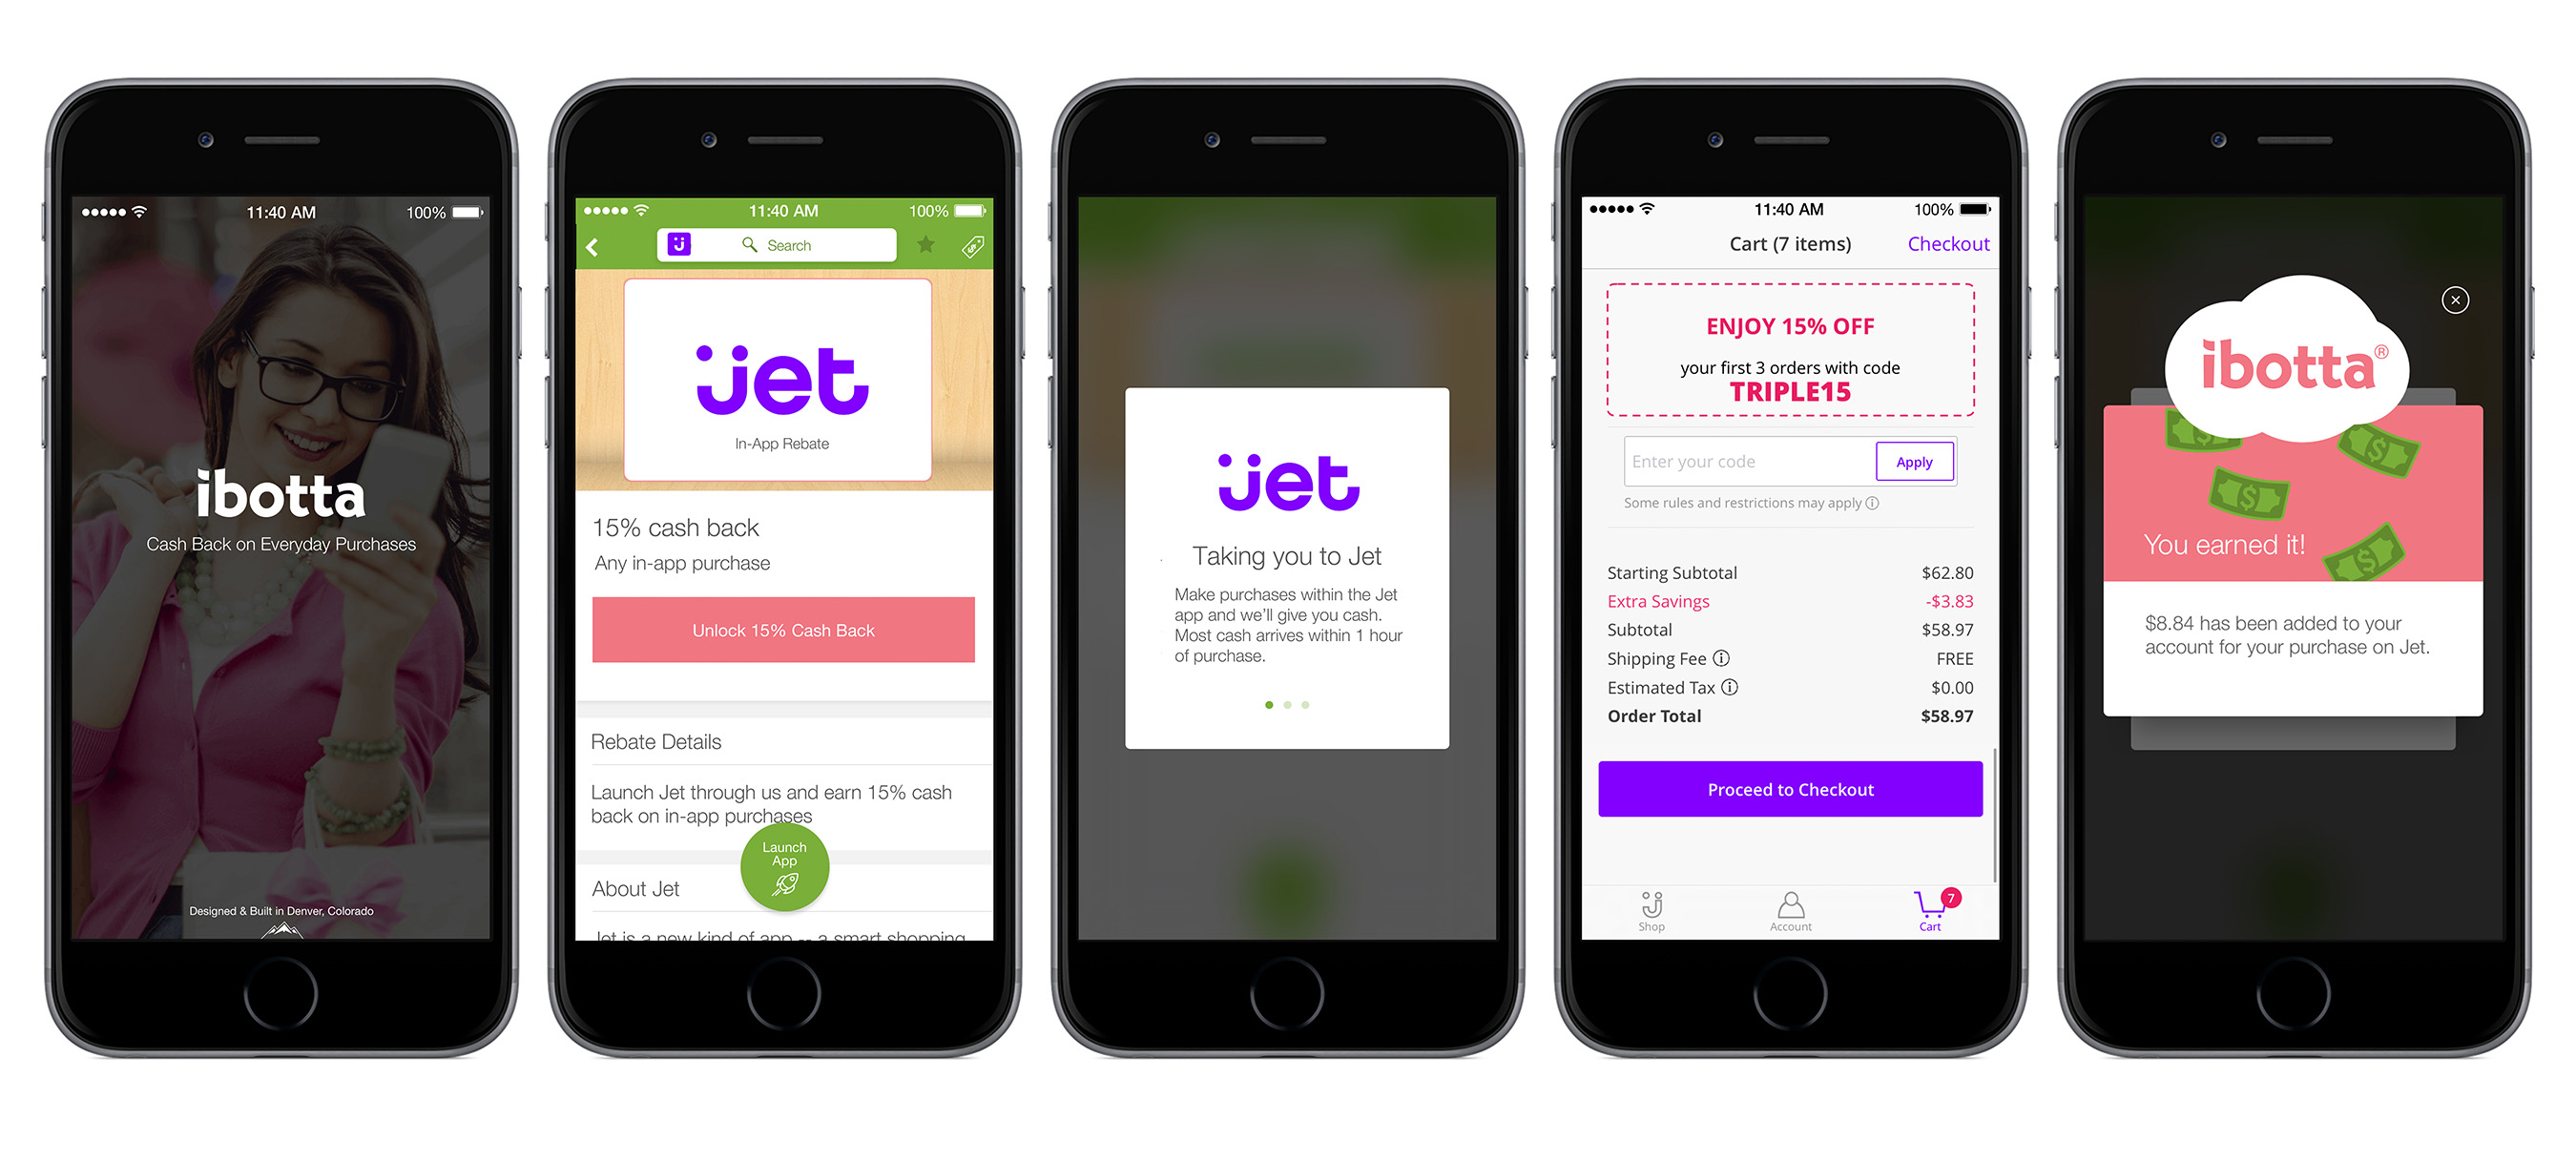 Ibotta Partners with Boxed, Groupon, Hotels.com, Jet and ...